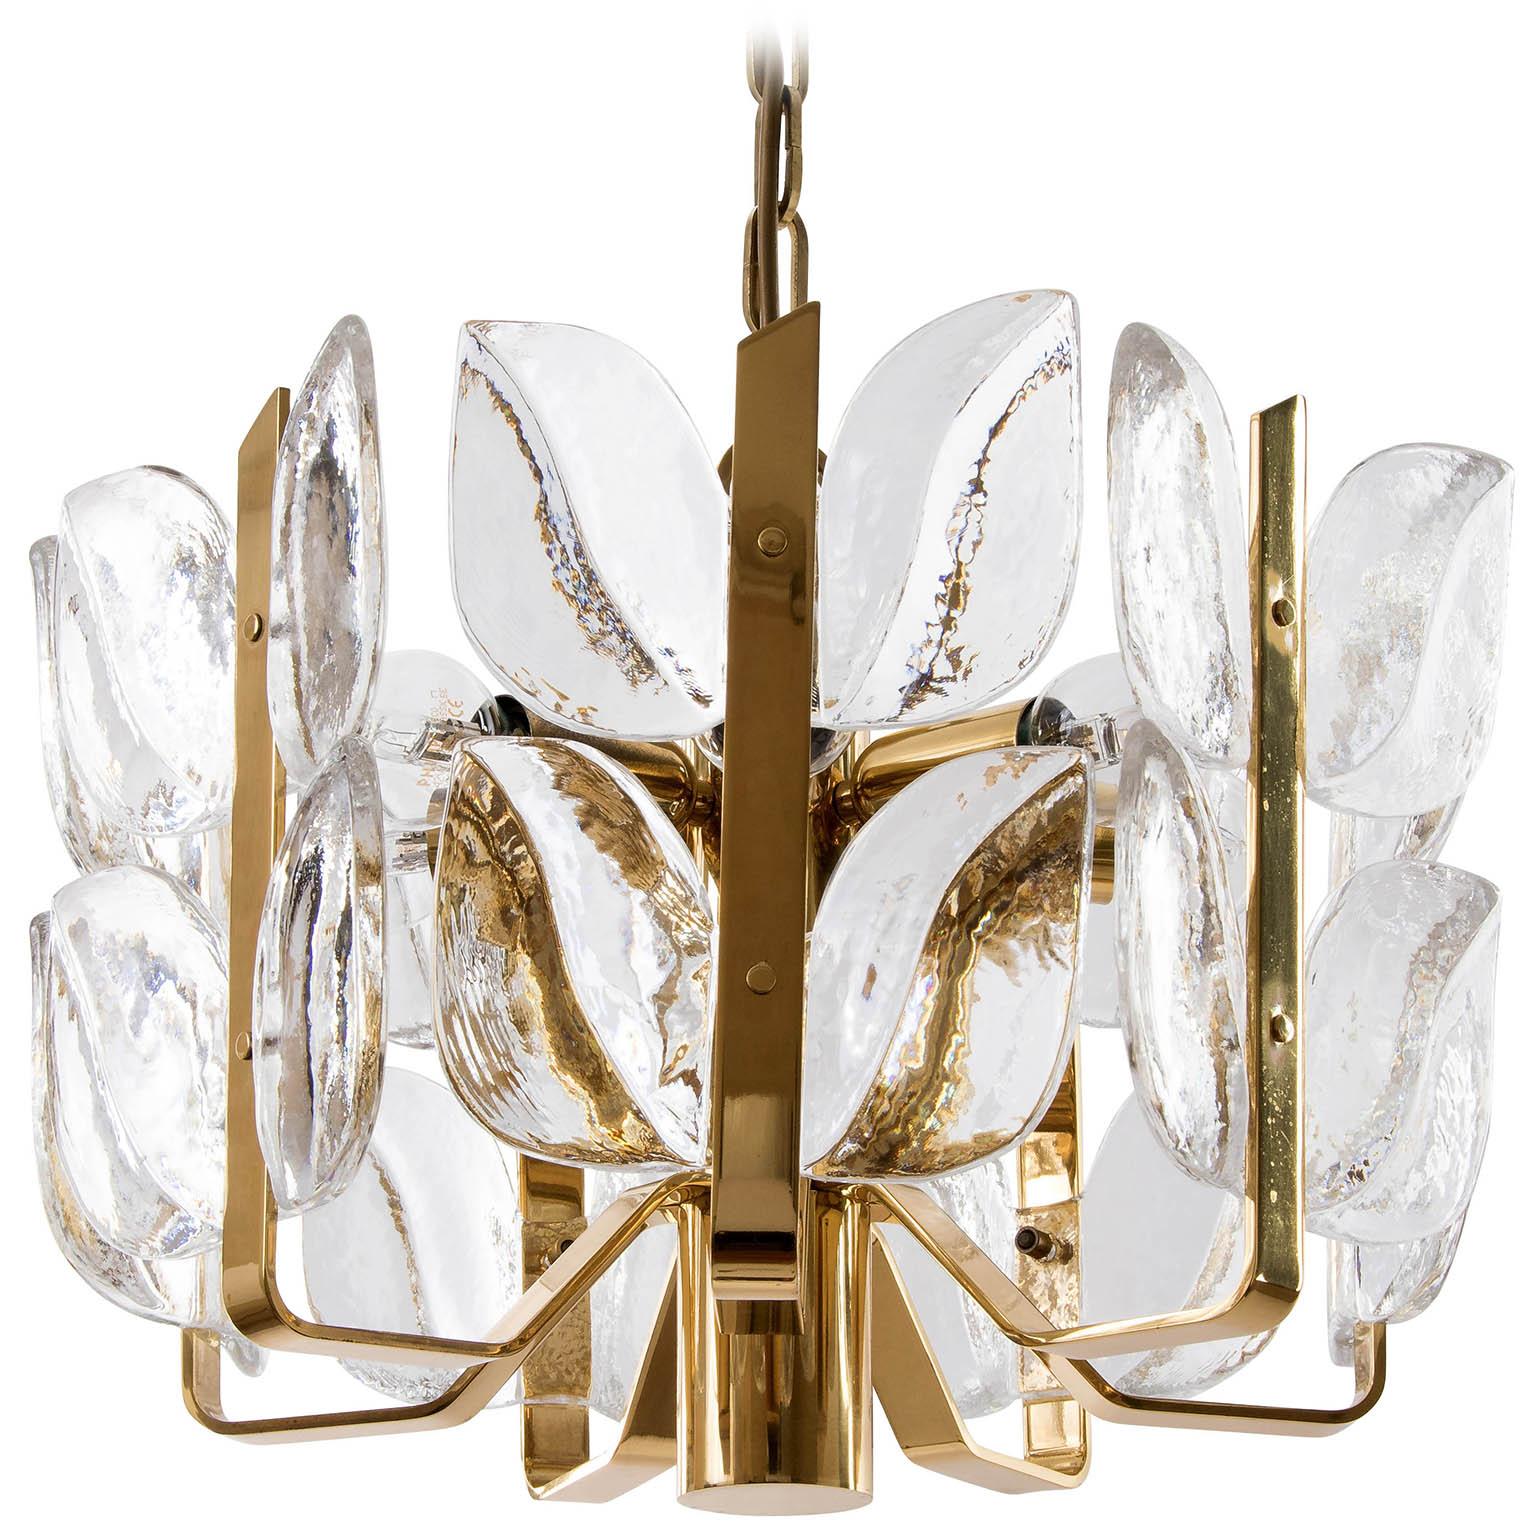 A rare and handmade high quality pendant light fixture model 'Florida' by J.T. Kalmar, Austria, manufactured in midcentury, circa 1970 (late 1960s or early 1970s).
The lamp is made of polished brass and large fire-polished brilliant crystal glasses